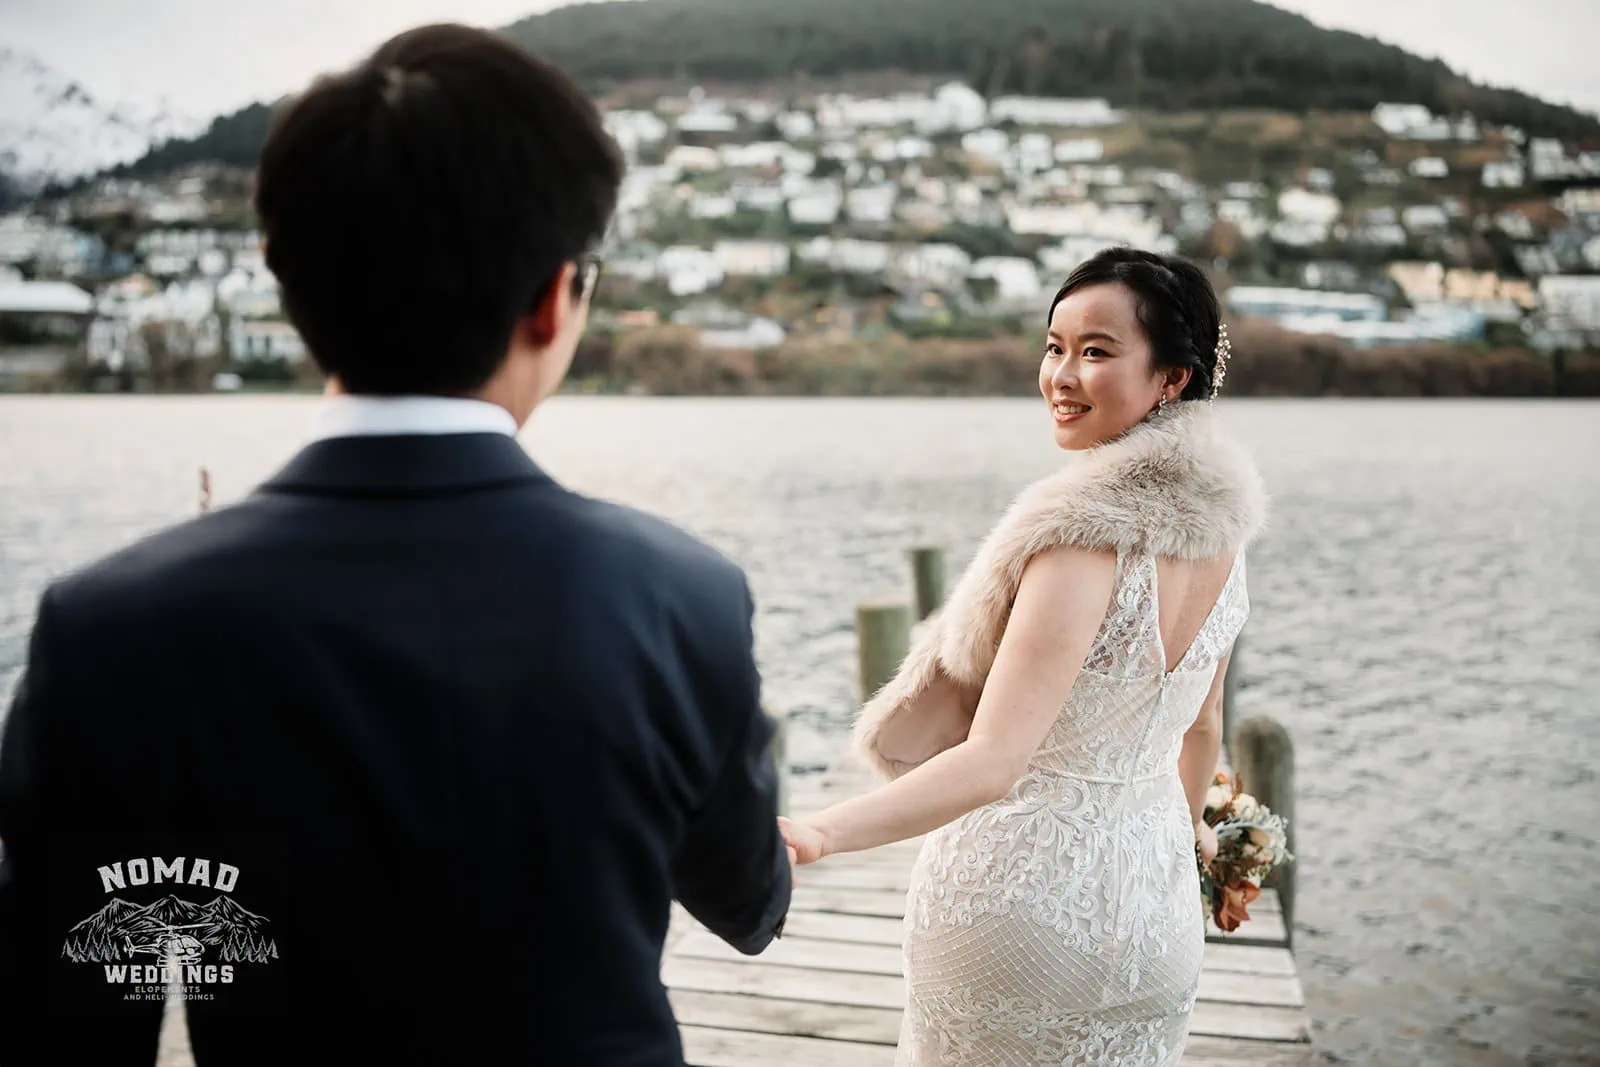 Joanna and Tony, a bride and groom, have their pre-wedding shoot on a dock with mountains in the background in Queenstown, New Zealand.